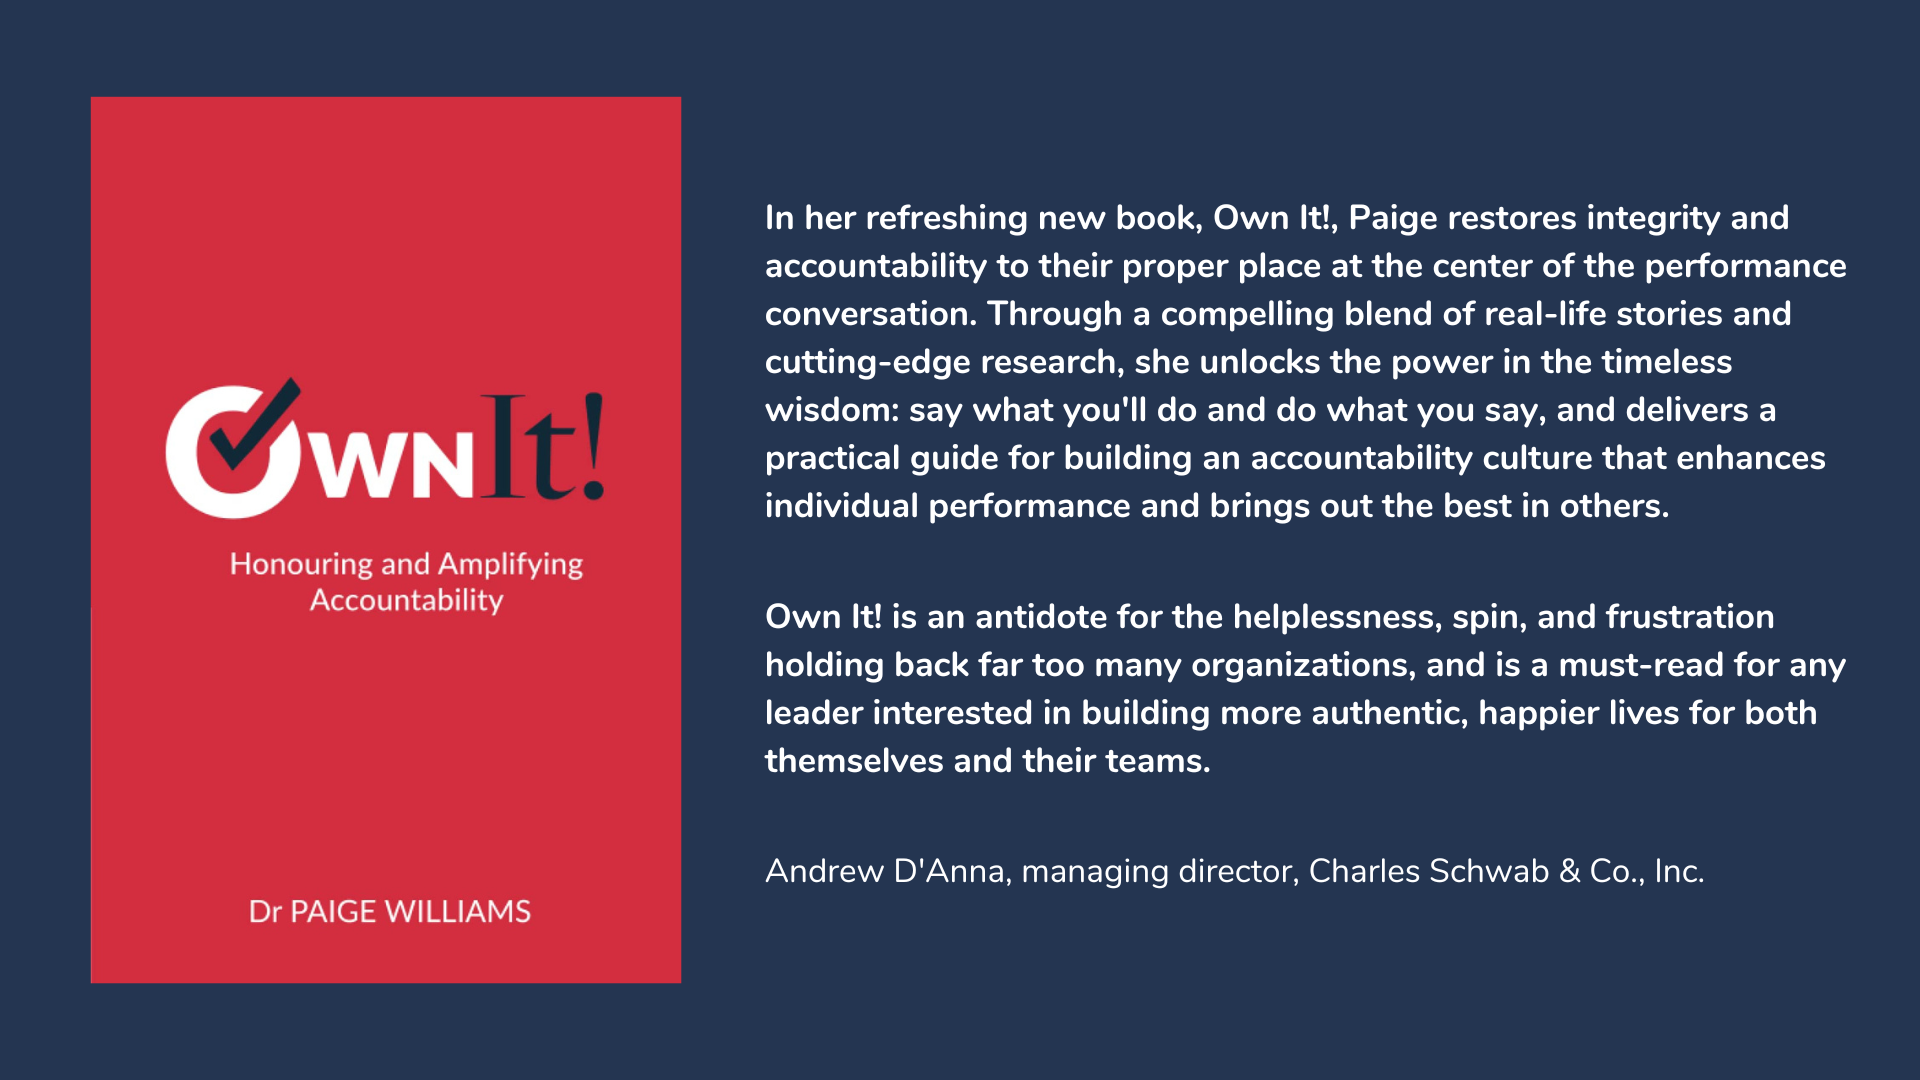 Own It!: Honouring and Amplifying Accountability, book cover and description.